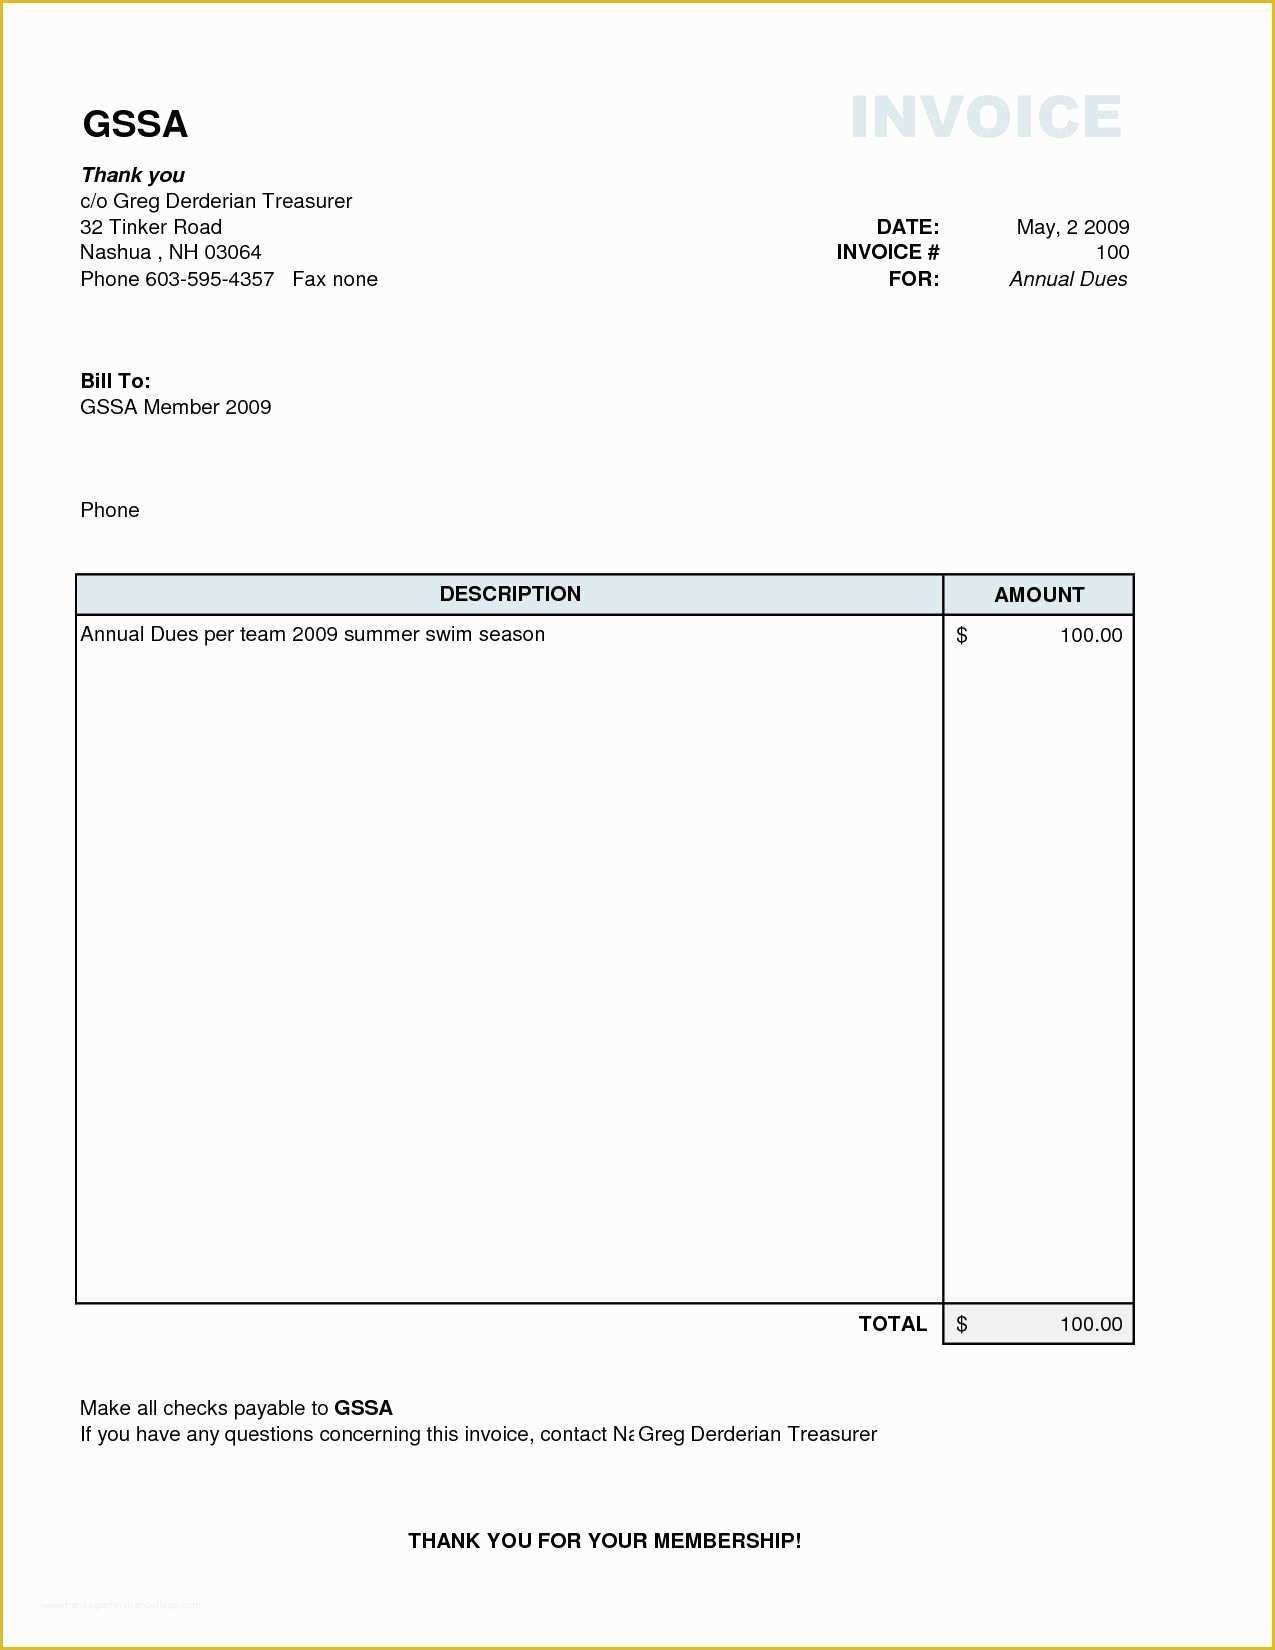 Free Invoice Template Word Of Plain Invoice Template Basic Invoice Template Excel Basic